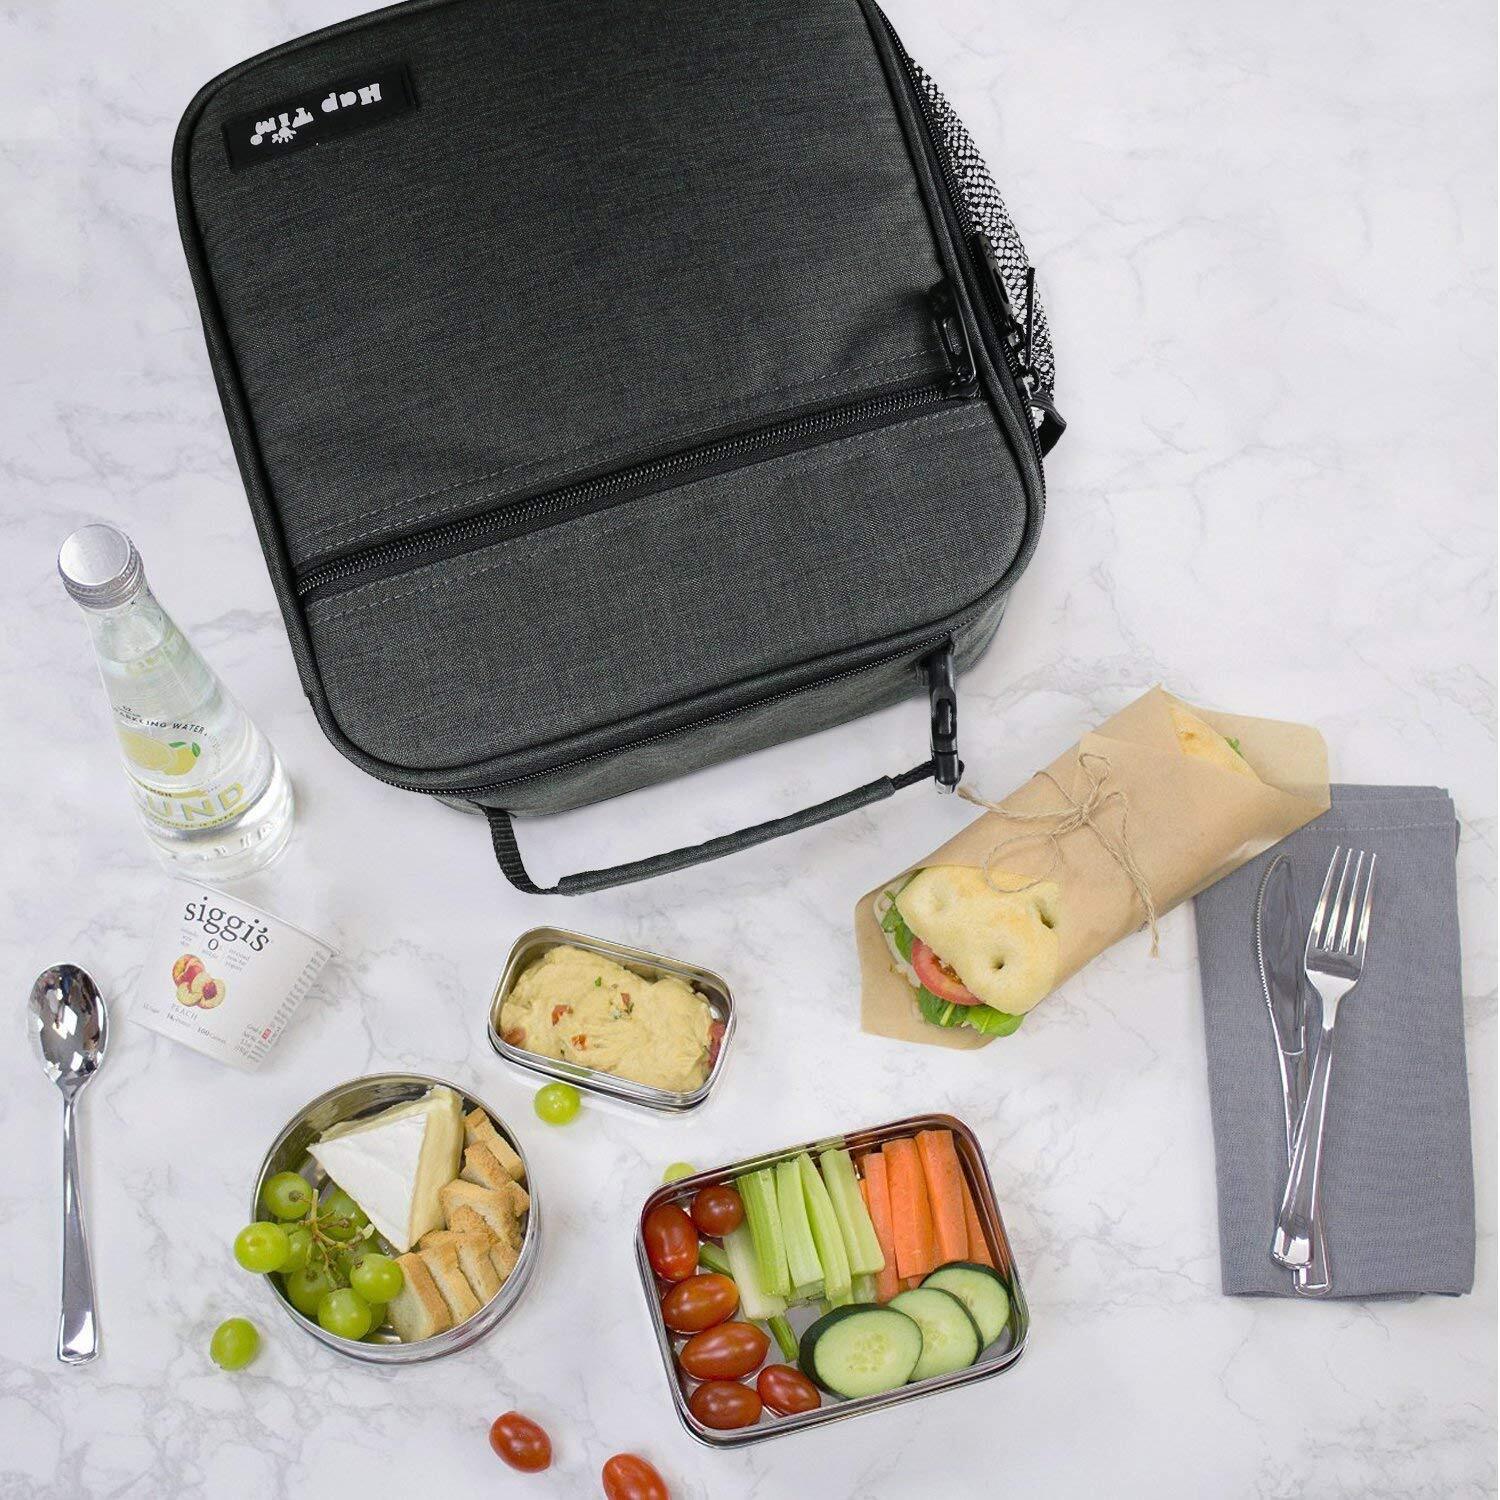 https://images.51microshop.com/1658/product/20180927/Hap_Tim_Insulated_Lunch_Bag_for_Men_Women_Reusable_Lunch_Box_for_Kids_Boys_Spacious_Lunchbox_Adult_18654_DG__1538012716130_2.jpg